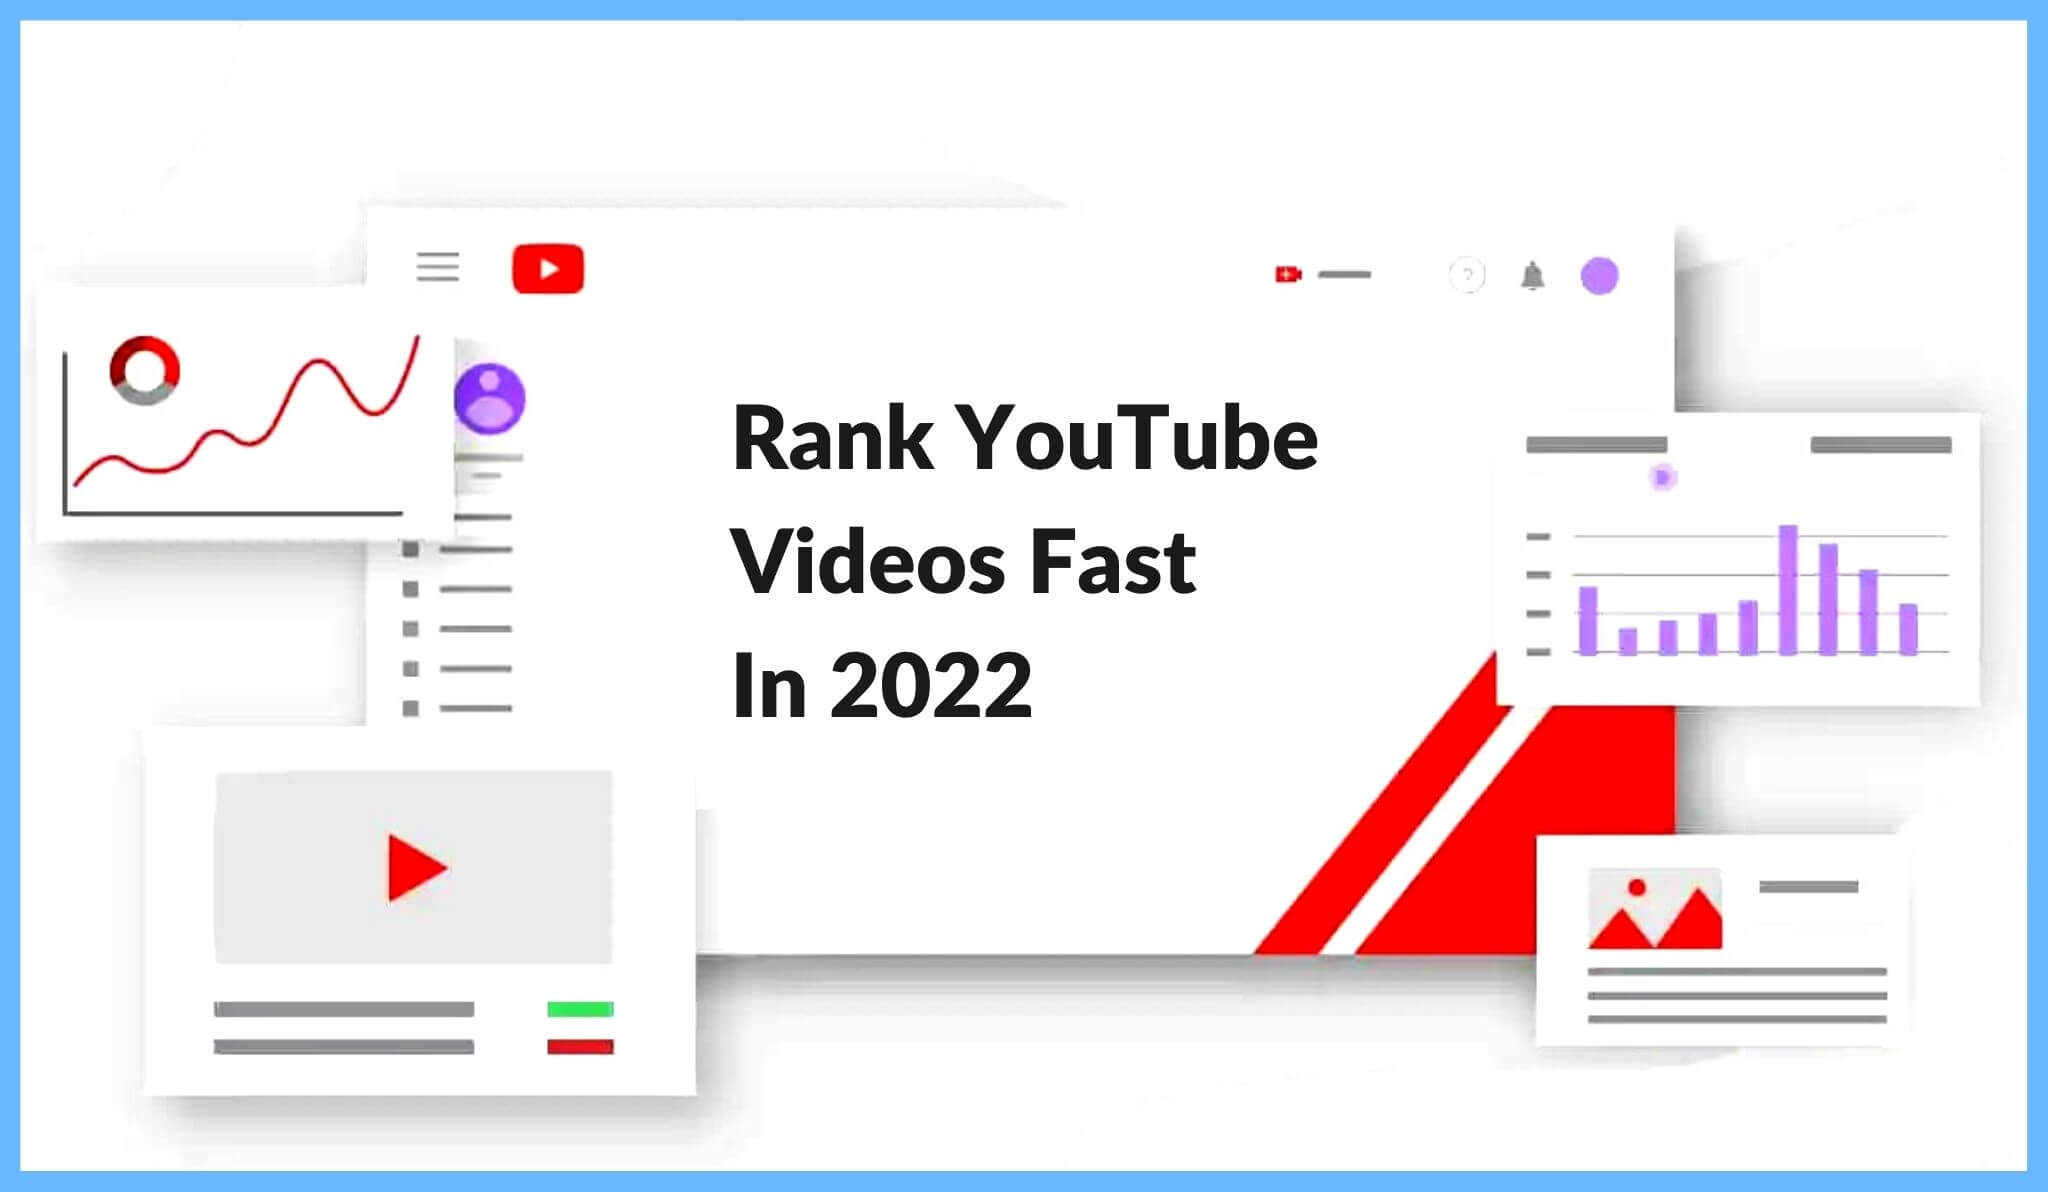 How To Rank YouTube Videos - How To Rank YouTube Videos Fast In 2020 -  YouTube SEO Tips -Simplilearn - YouTube